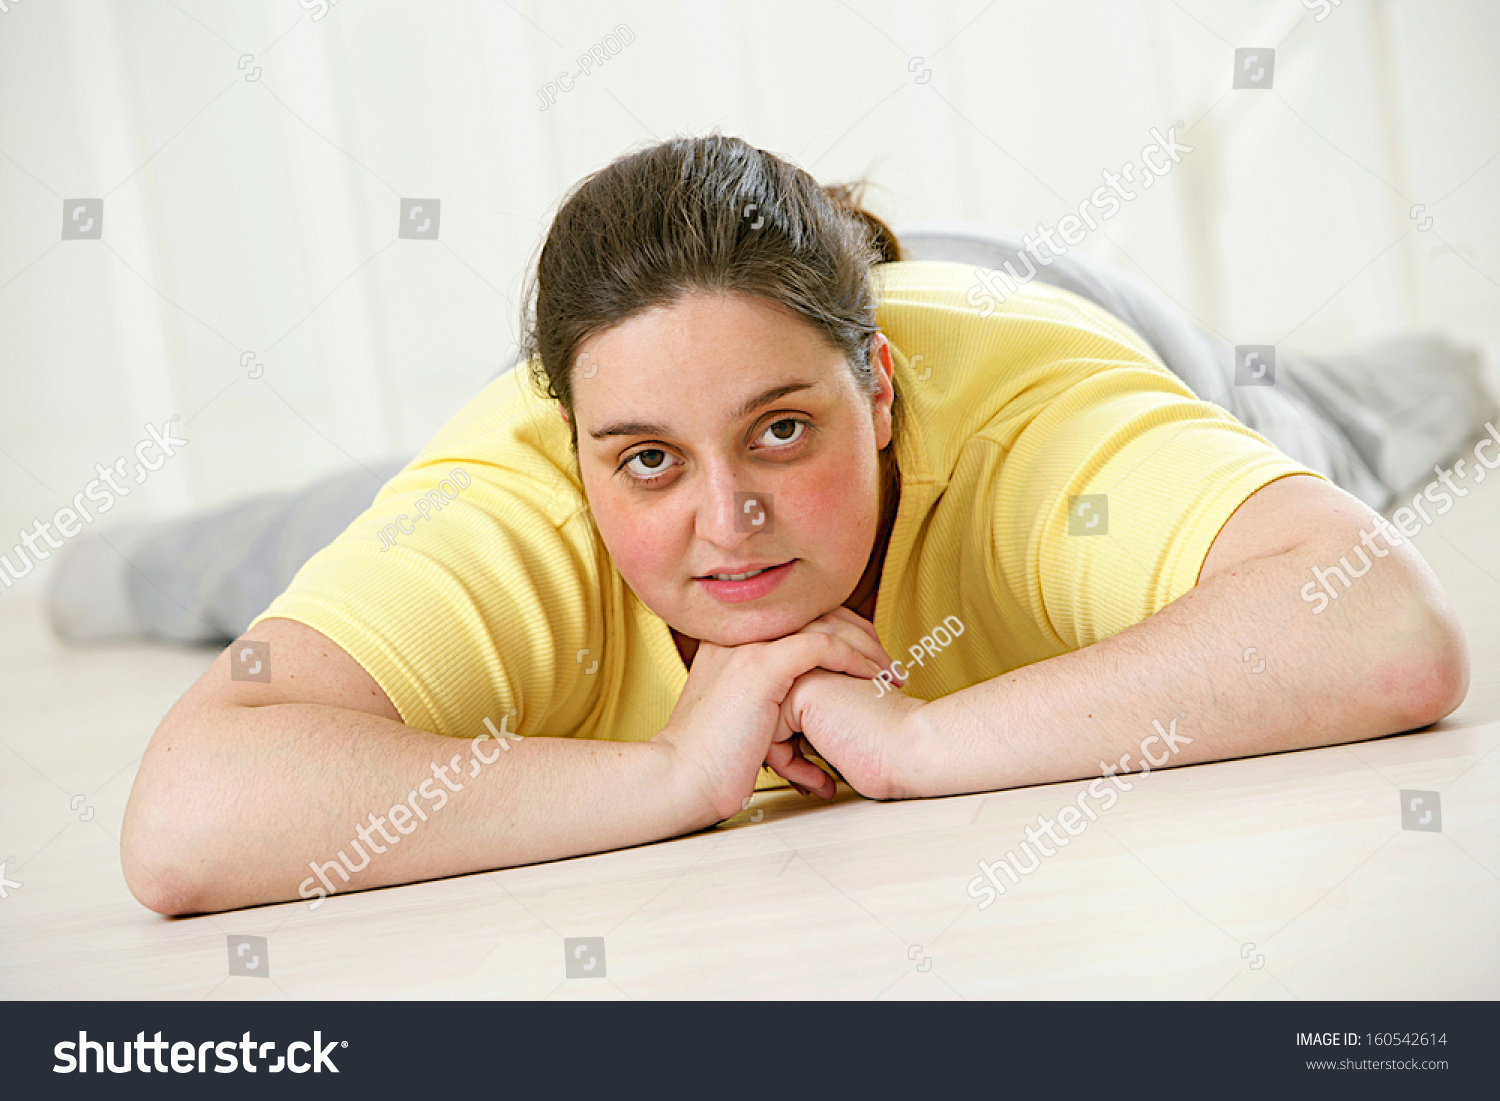 Daily Life Of An Overweight Woman Stock Photo 160542614 Shutterstock